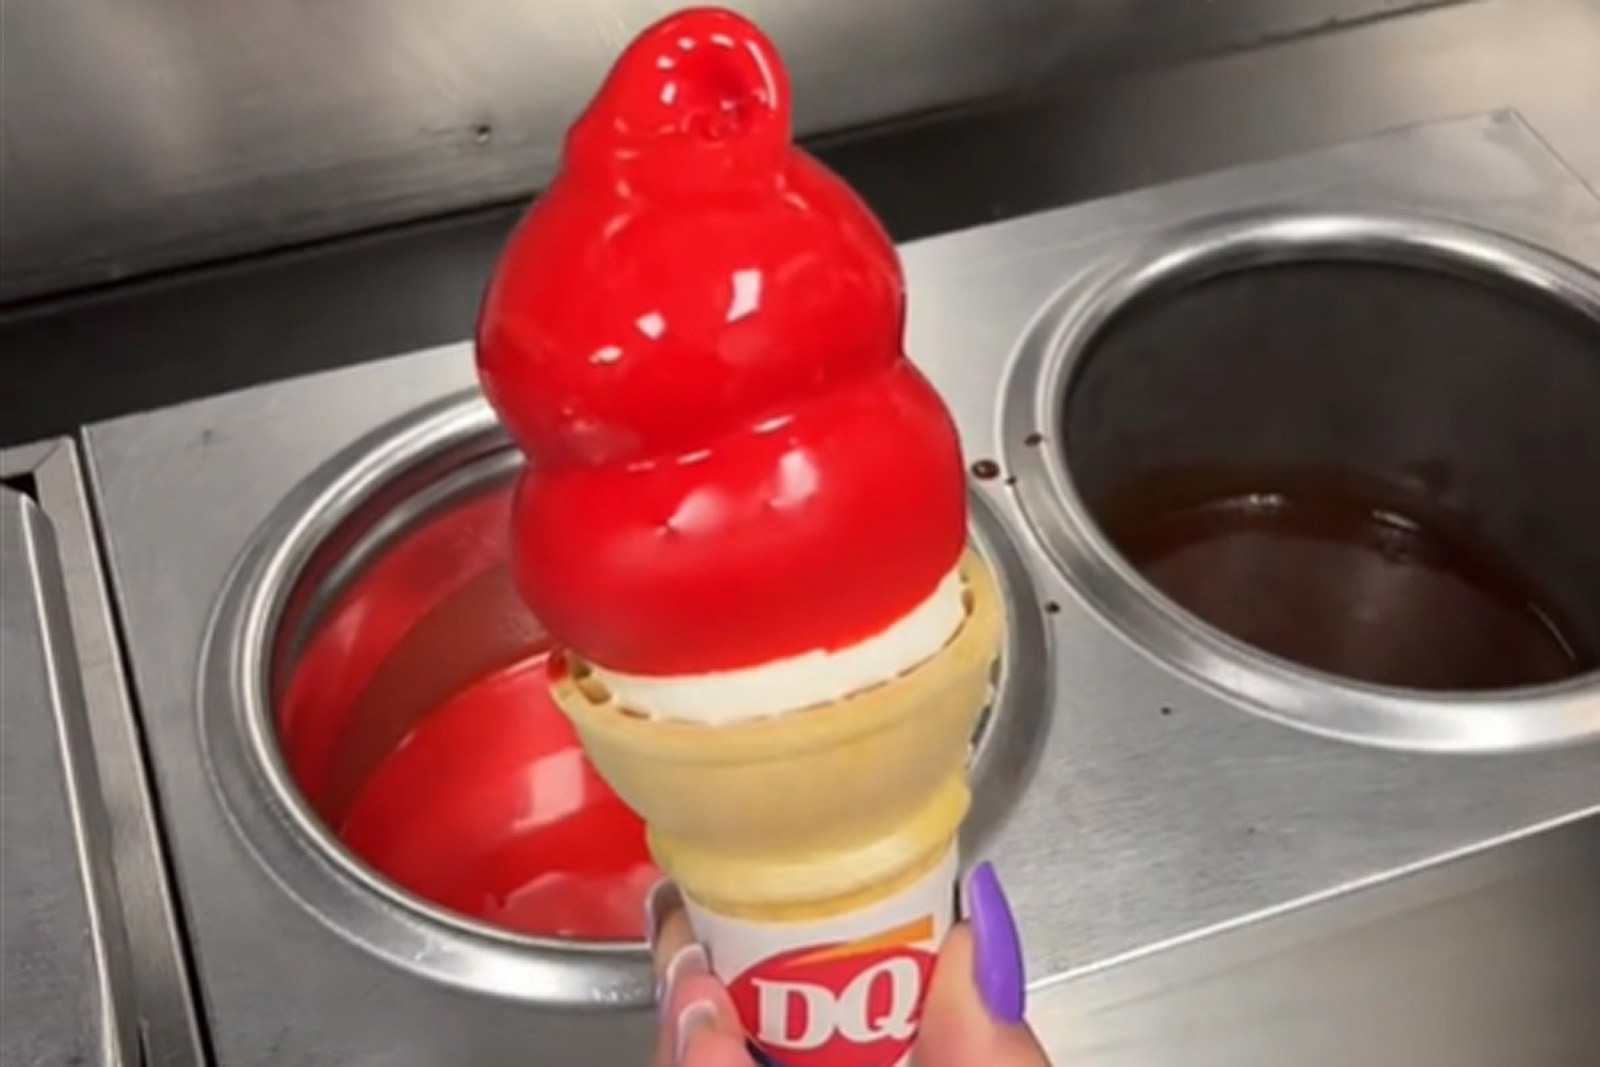 Dairy Queen Cancels a Popular Flavor + the Goes Crazy WKKY